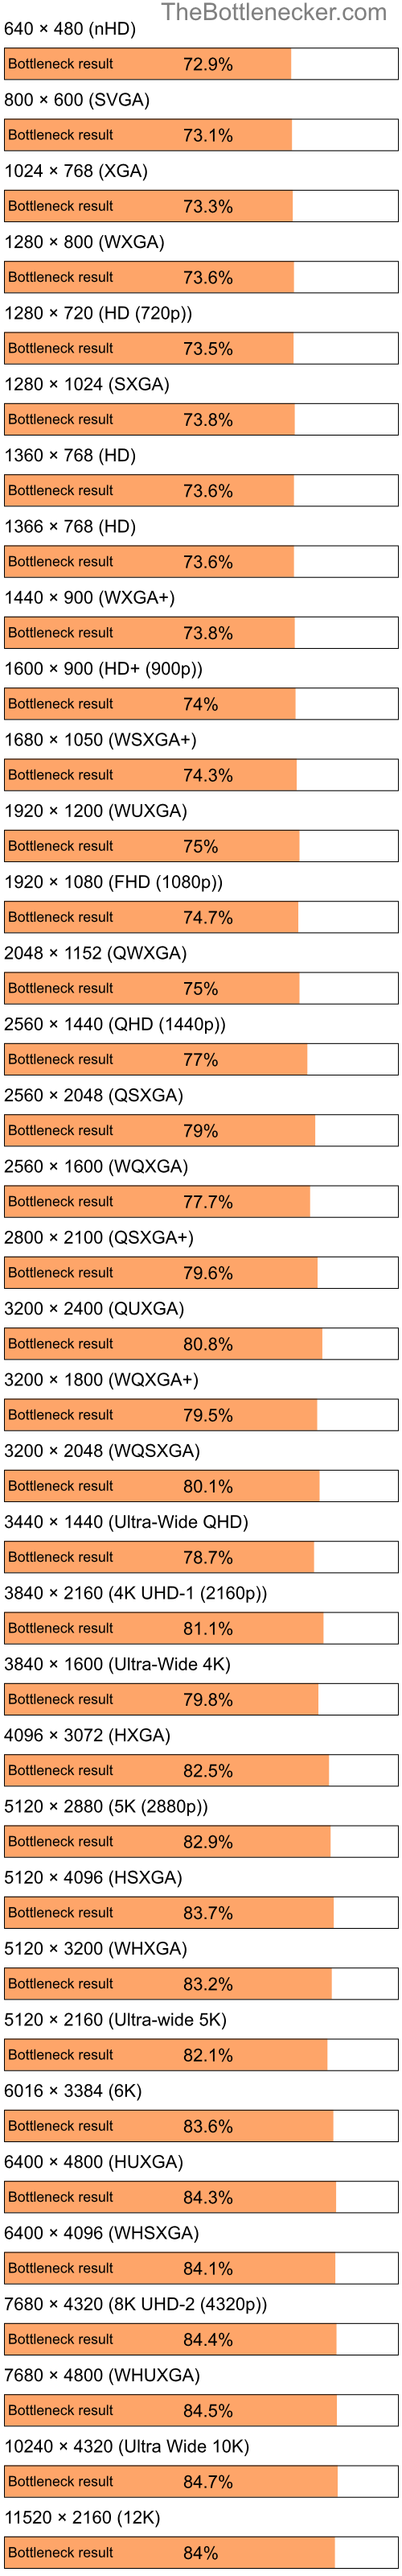 Bottleneck results by resolution for Intel Celeron M 410 and AMD Radeon HD 2350 in Graphic Card Intense Tasks